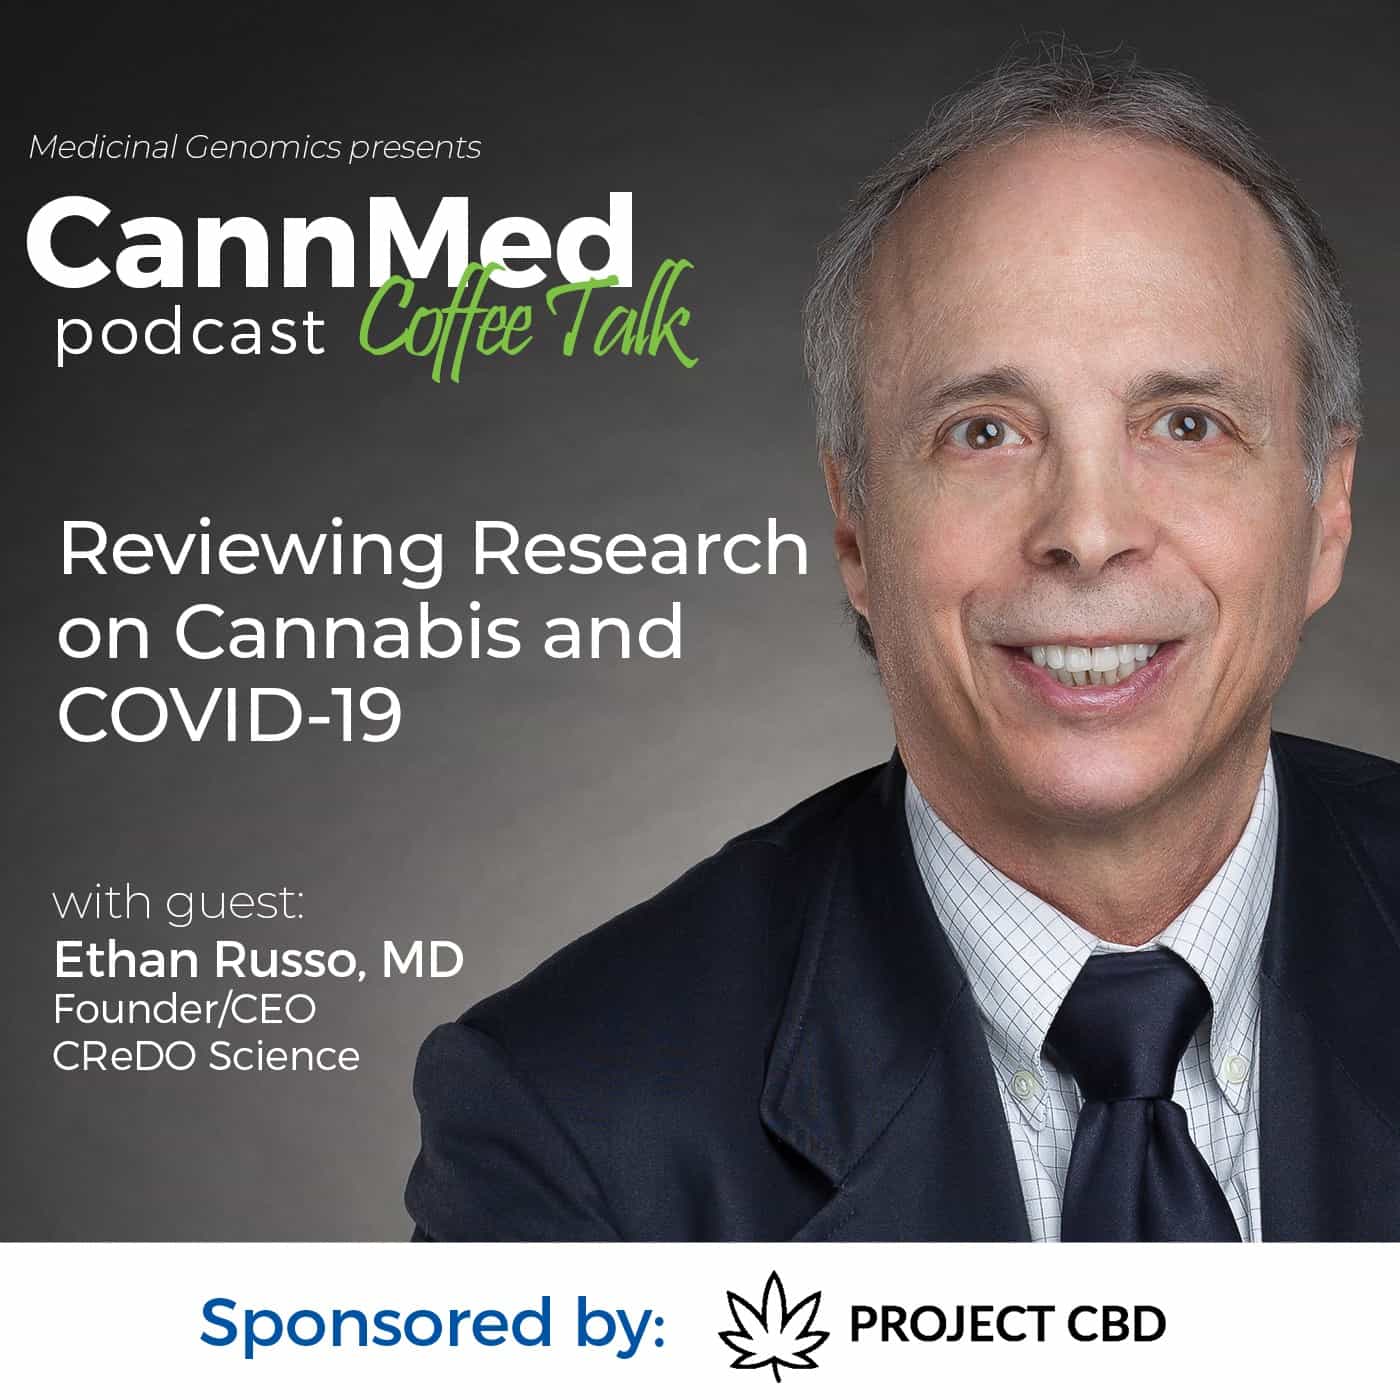 Featured image for “Reviewing Research on  Cannabis and COVID-19 with Ethan Russo, MD”